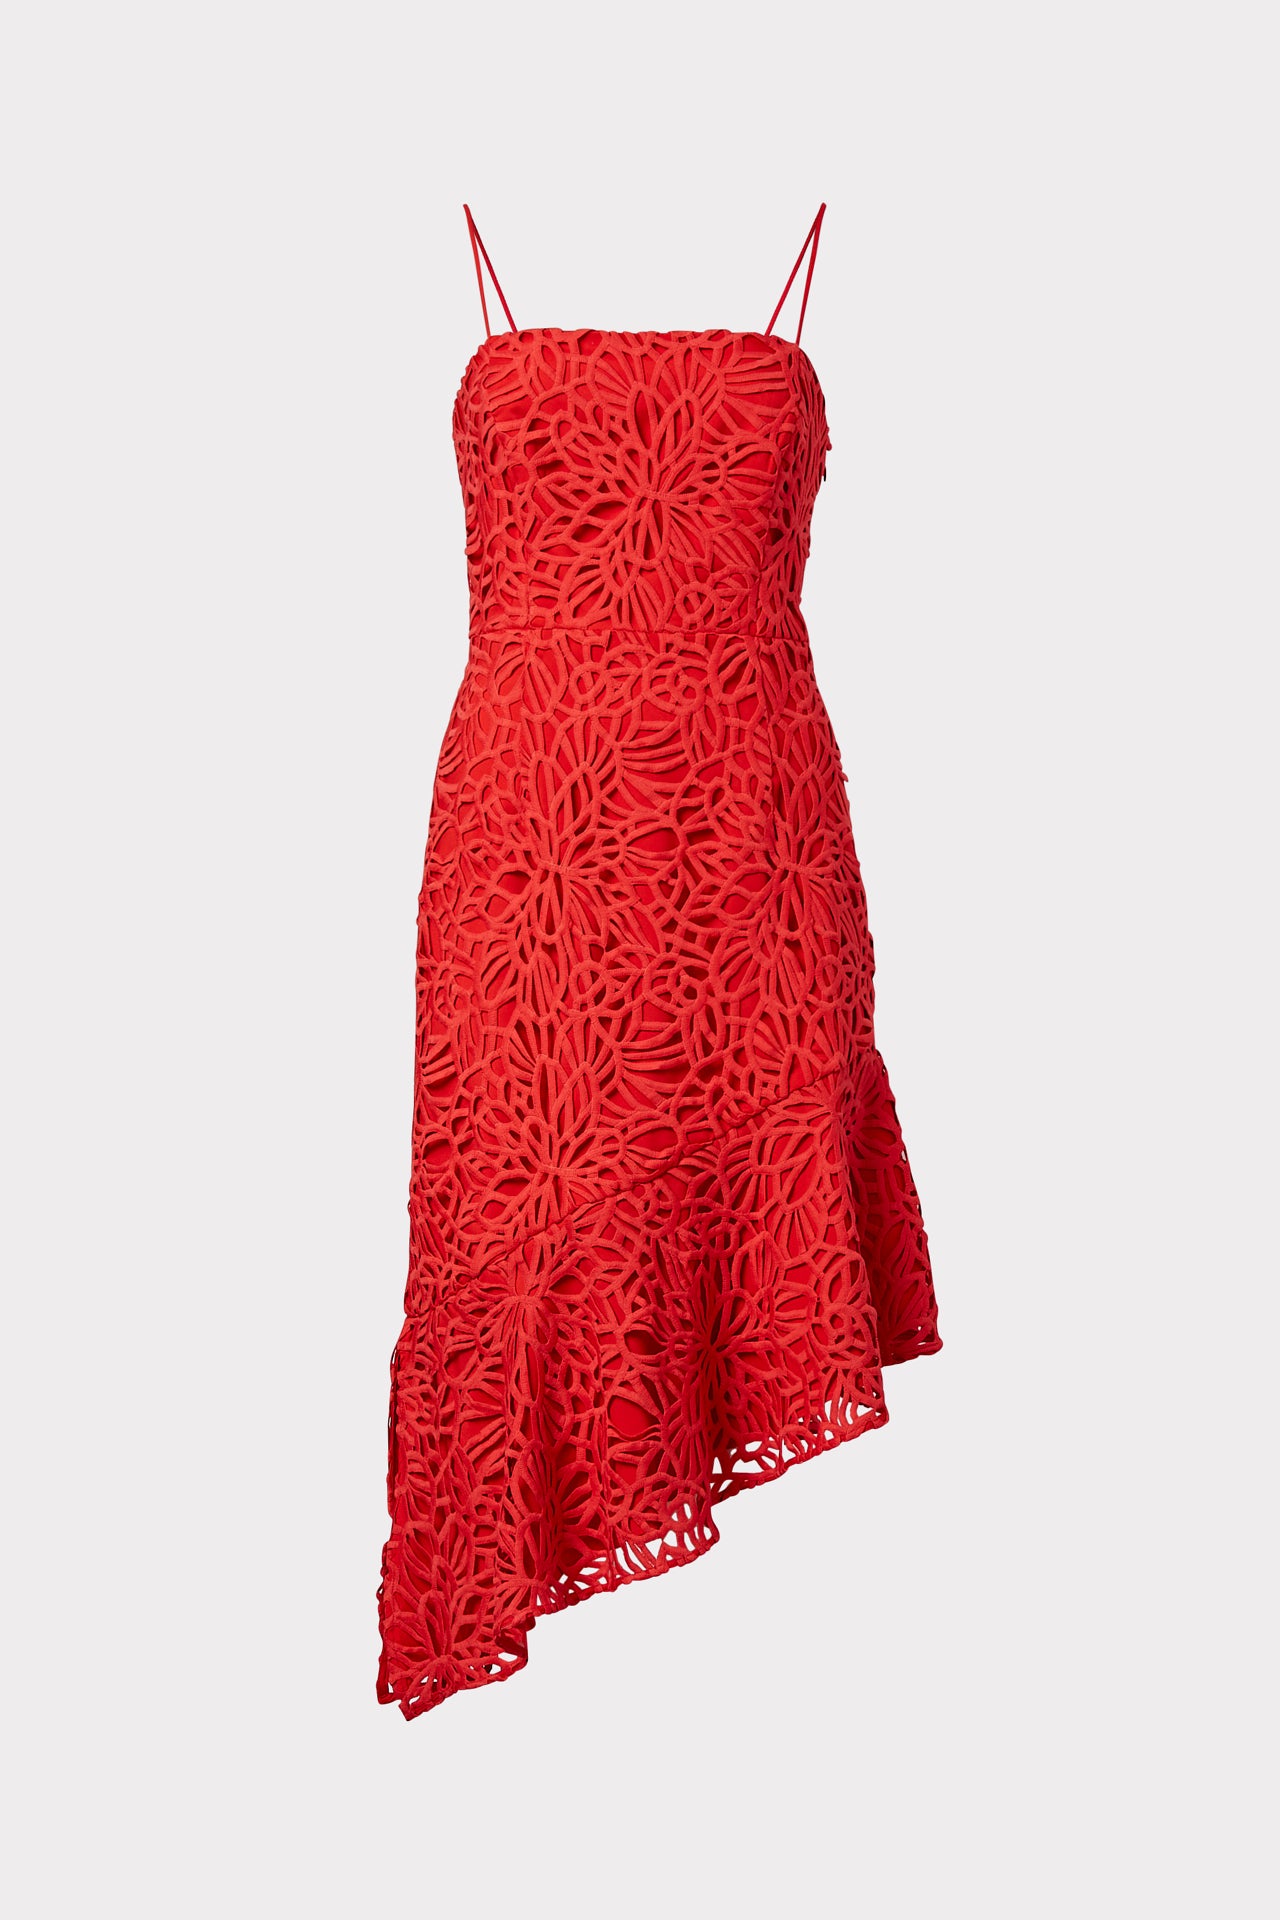 Milly Diara Embroidered Lace Dress In Summer Coral